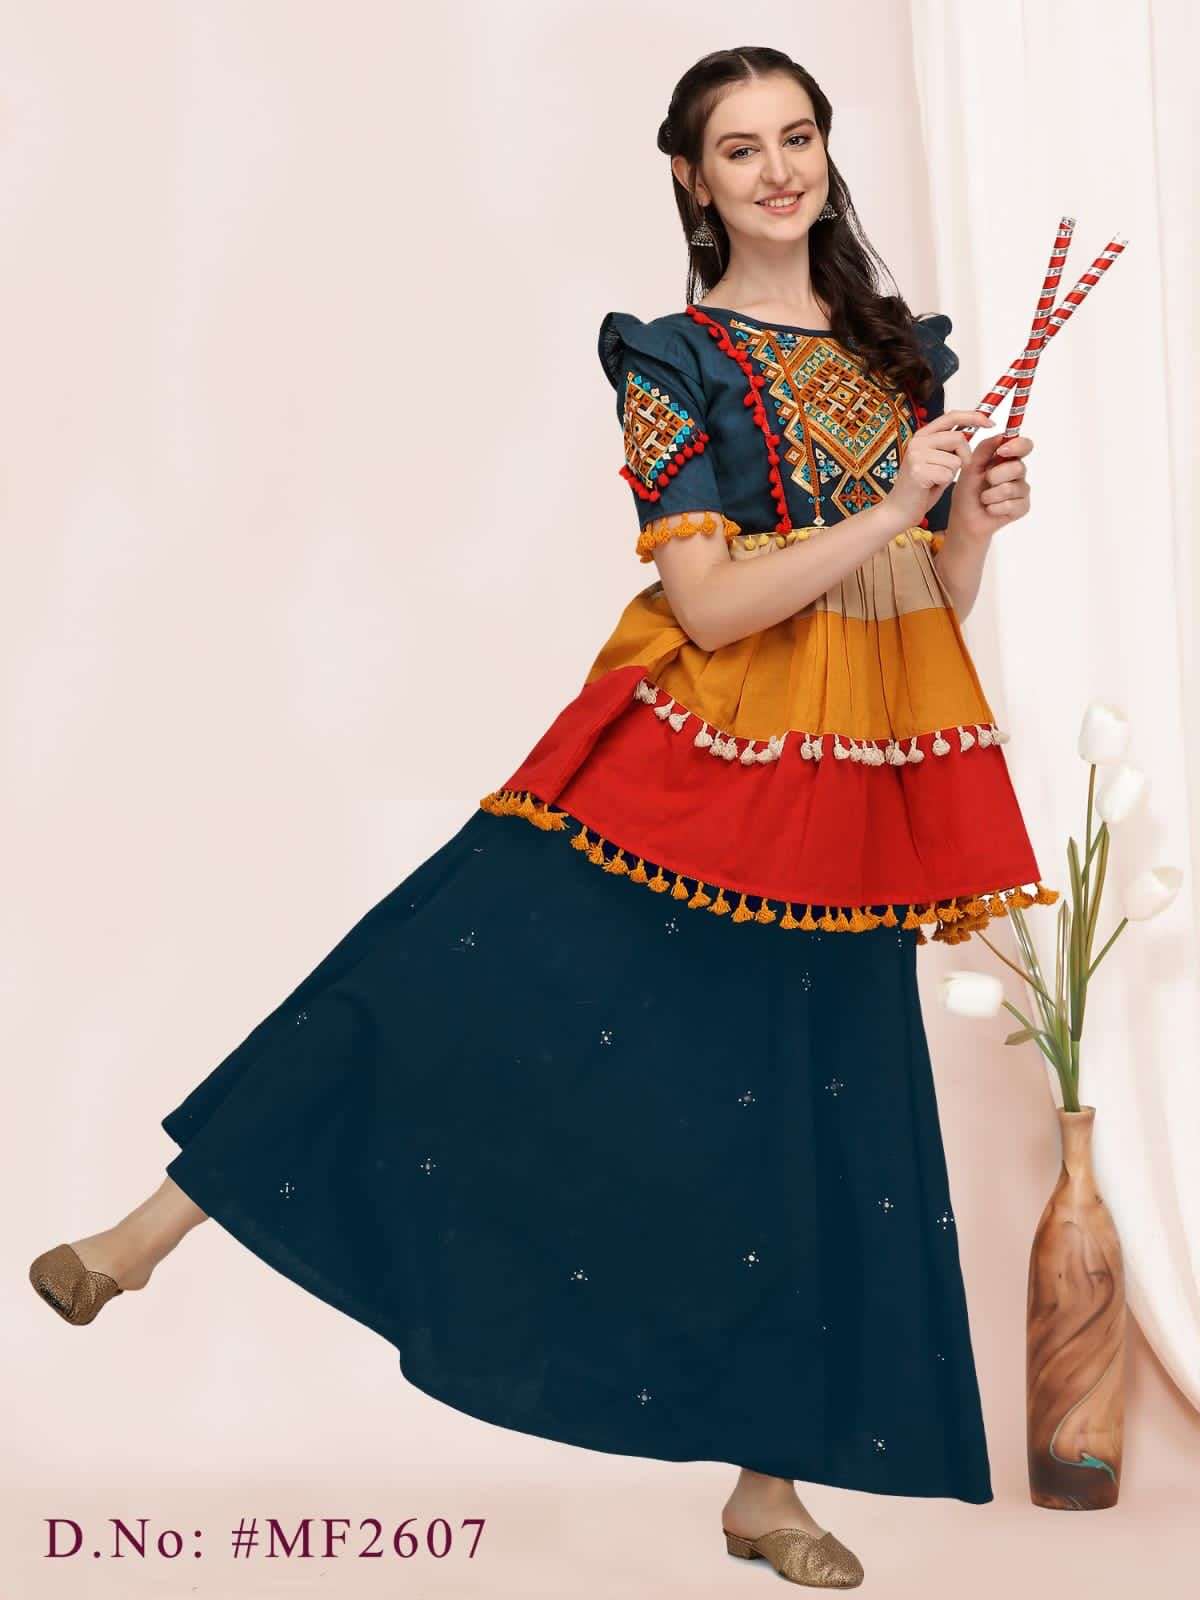 Gujarati traditional navrarti wear with amazing craftsmanship of designs  and patterns